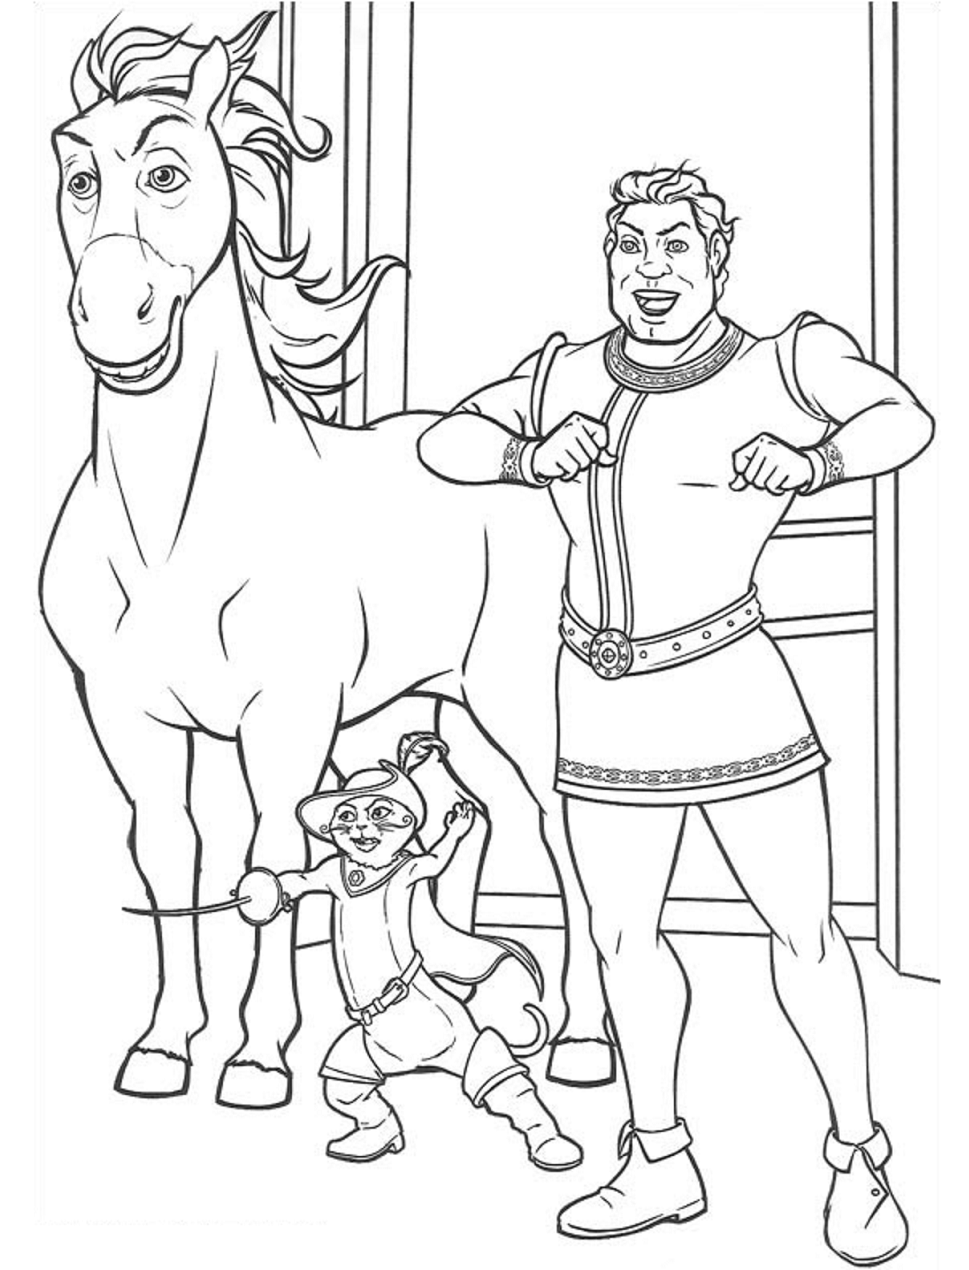 Download Doneky, Puss And Shrek Coloring Page - Free Printable Coloring Pages for Kids